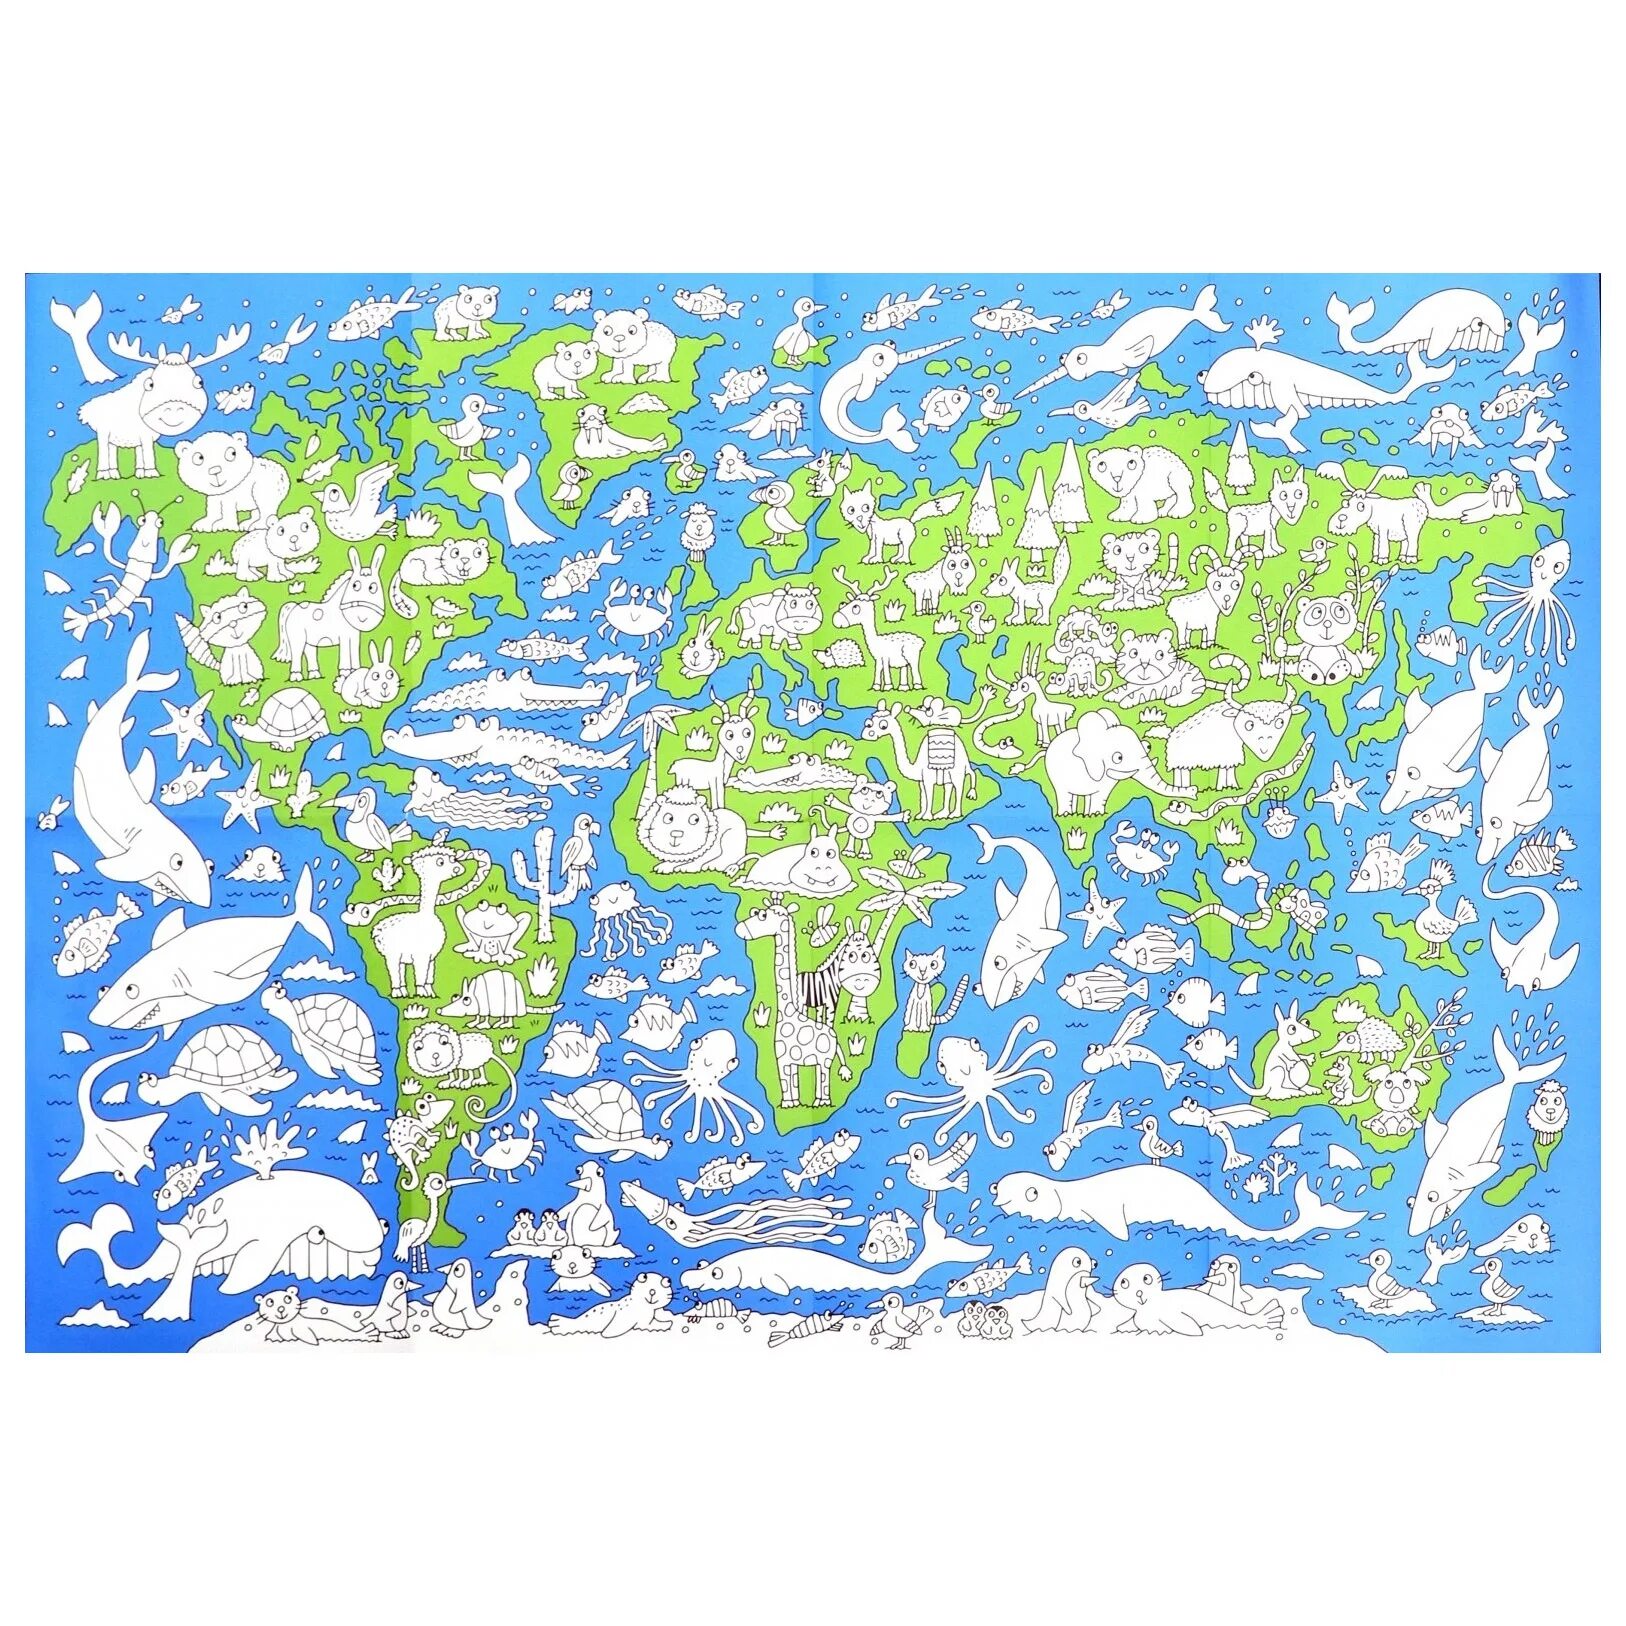 Giant map of the world #15